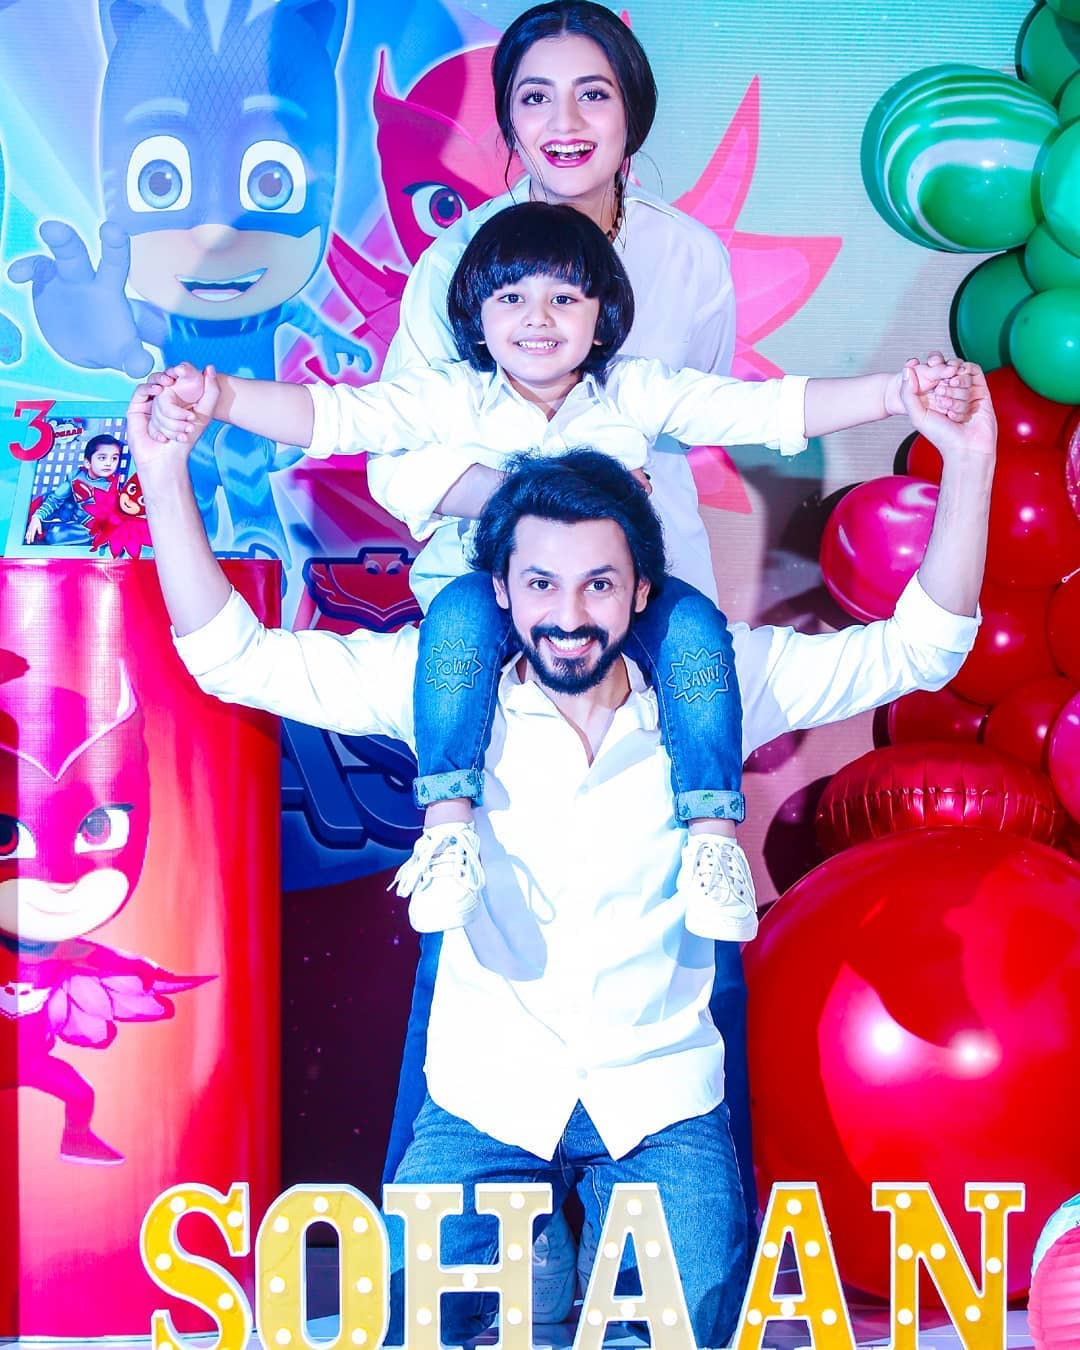 Bilal Qureshi and Uroosa Son Sohaan 4th Birthday Pictures